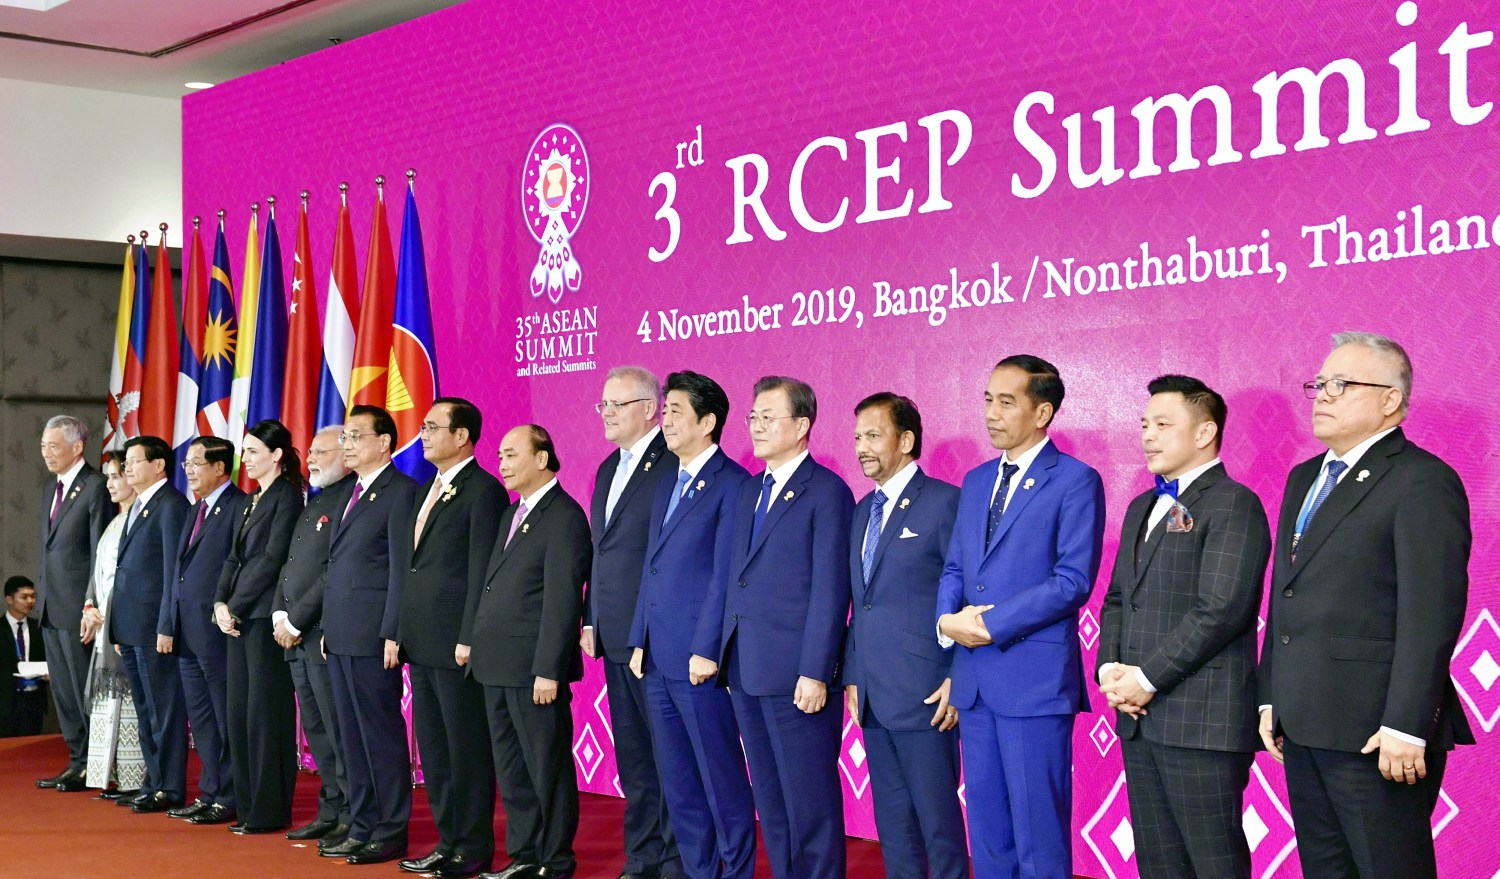 Members of Regional Comprehensive Economic Partnership（RCEP）including South Korea’s President Moon Jae-in (5th from R) and Japan's Prime Minister Shinzo Abe (6th from R) attend the 3rd RCEP Summit in Bangkok, Thailand on Nov. 4, 2019.    ( The Yomiuri Shimbun )